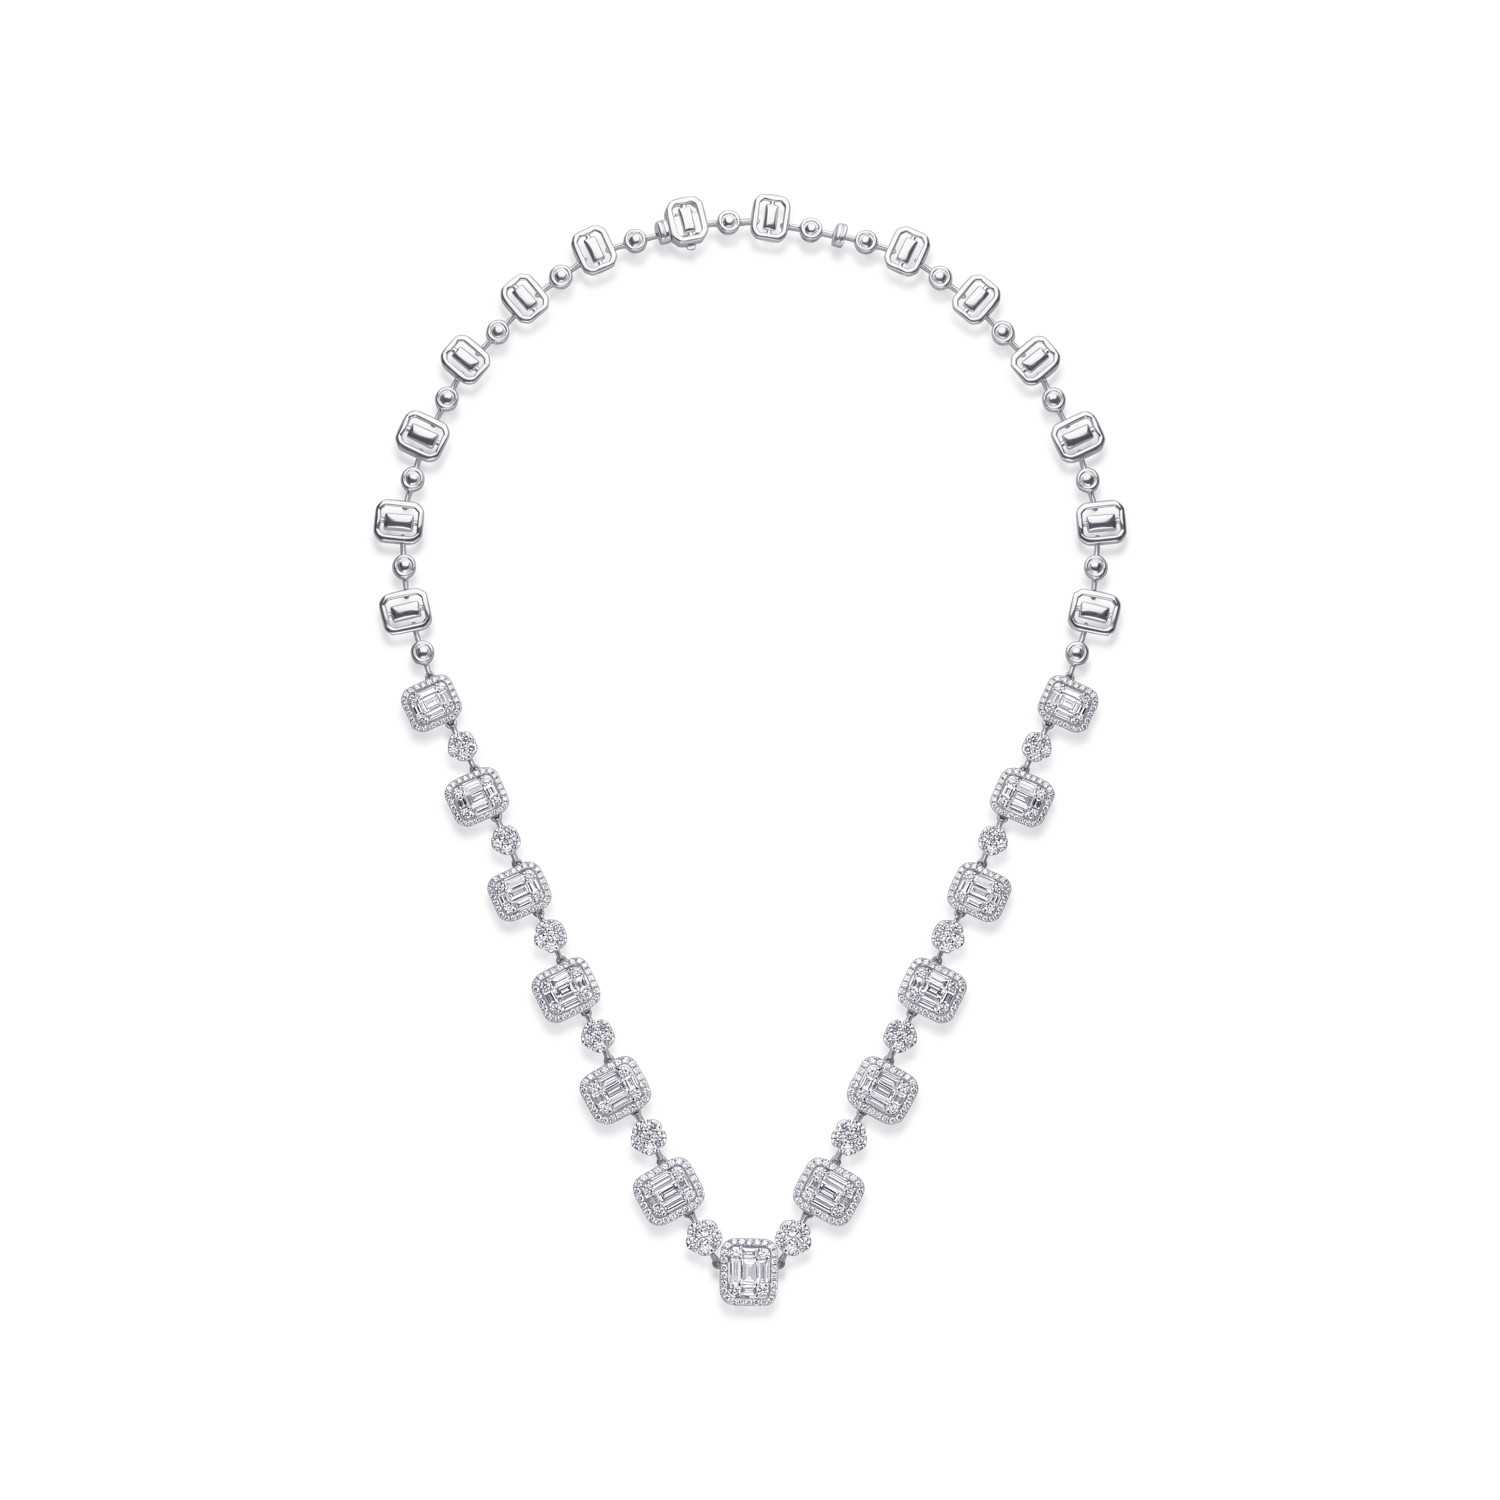 18K white gold necklace with 4.65ct diamonds